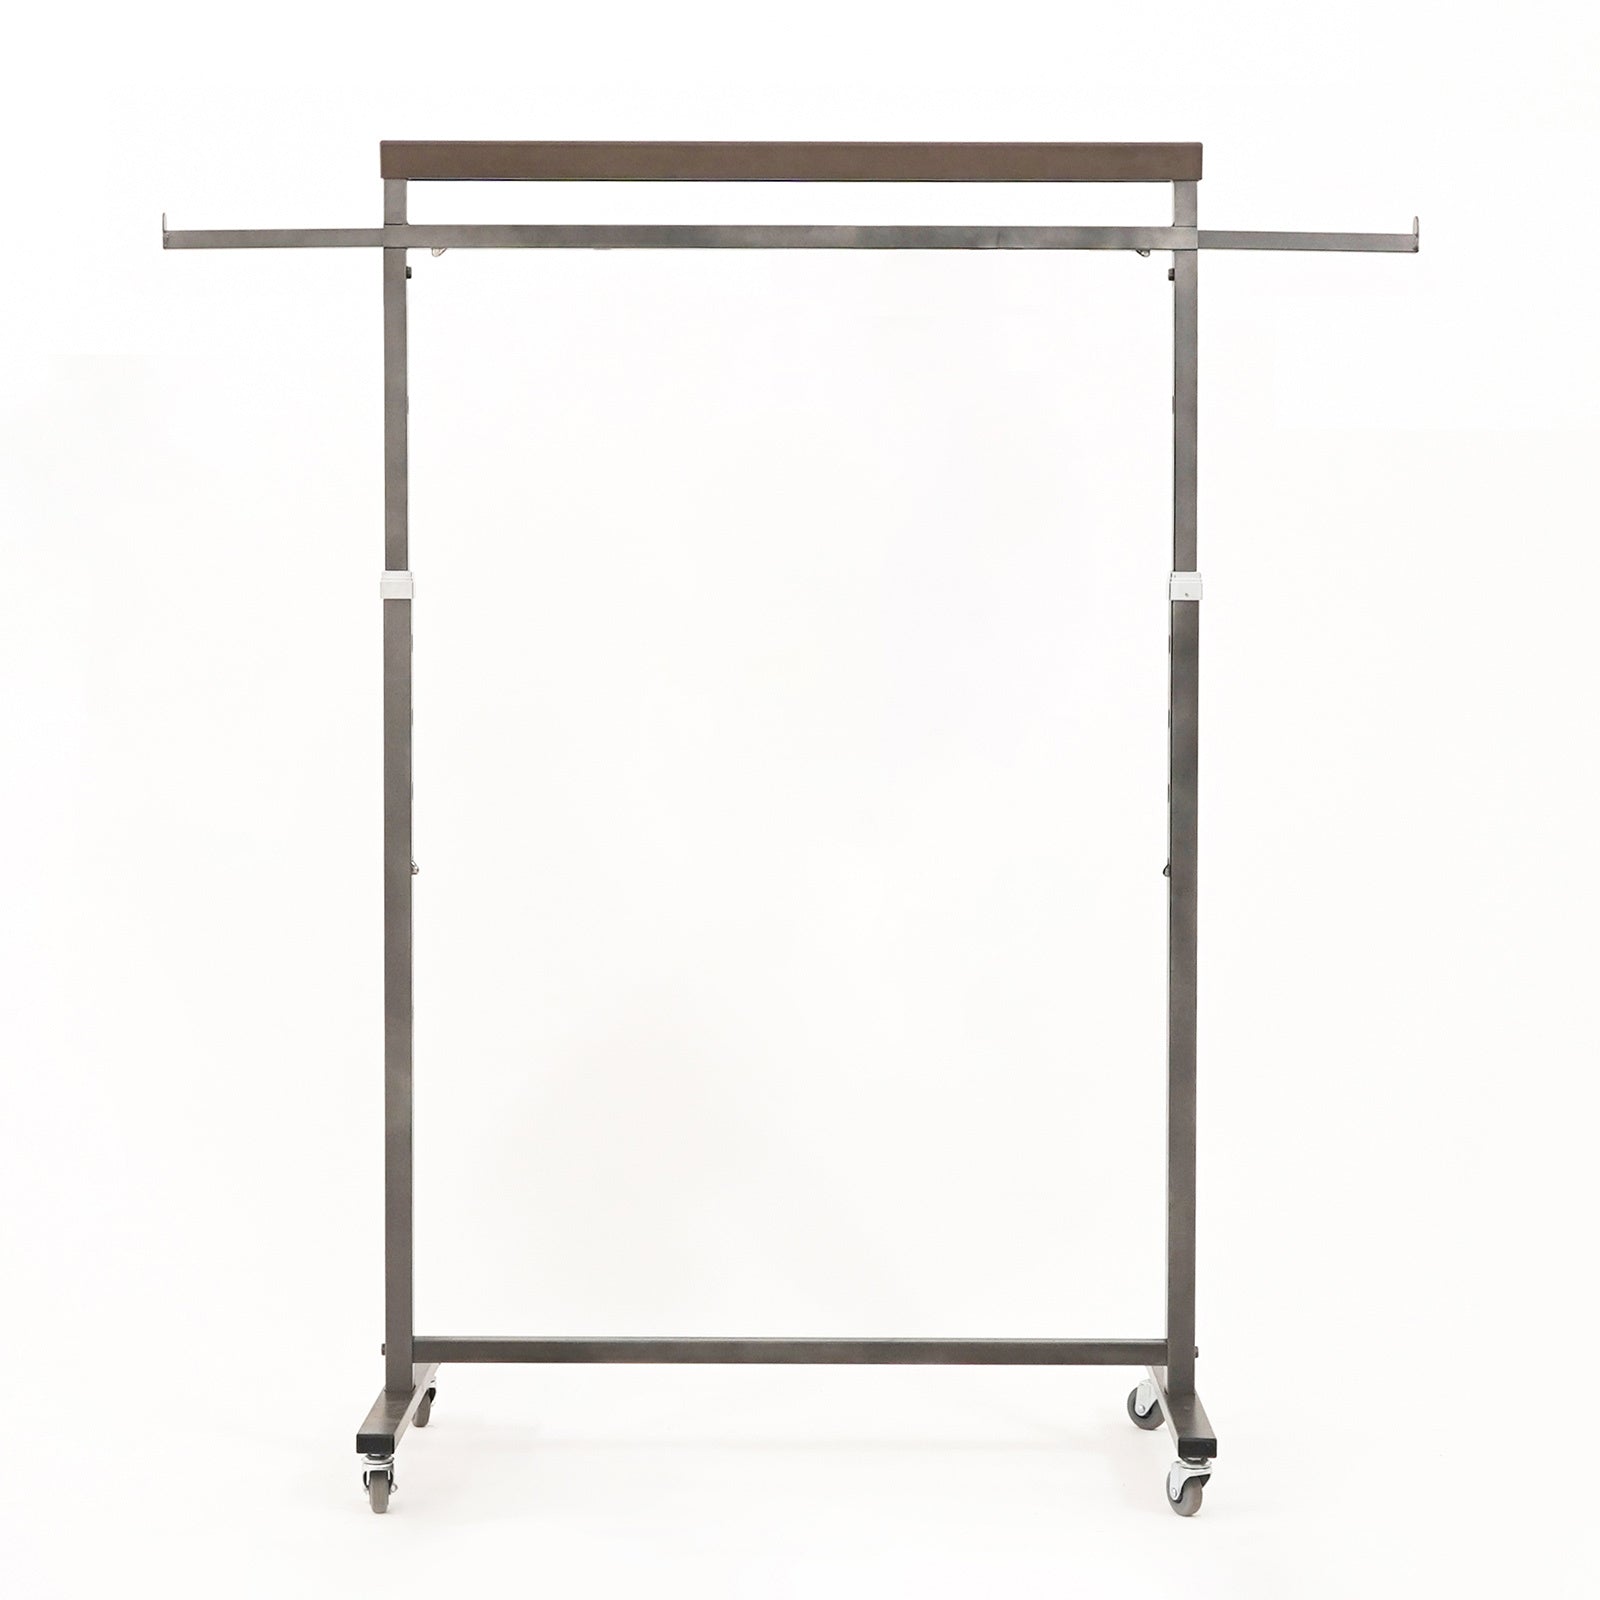 Clothes Rack Coat Stand Hanging Adjustable Rollable Steel PEARL GREY